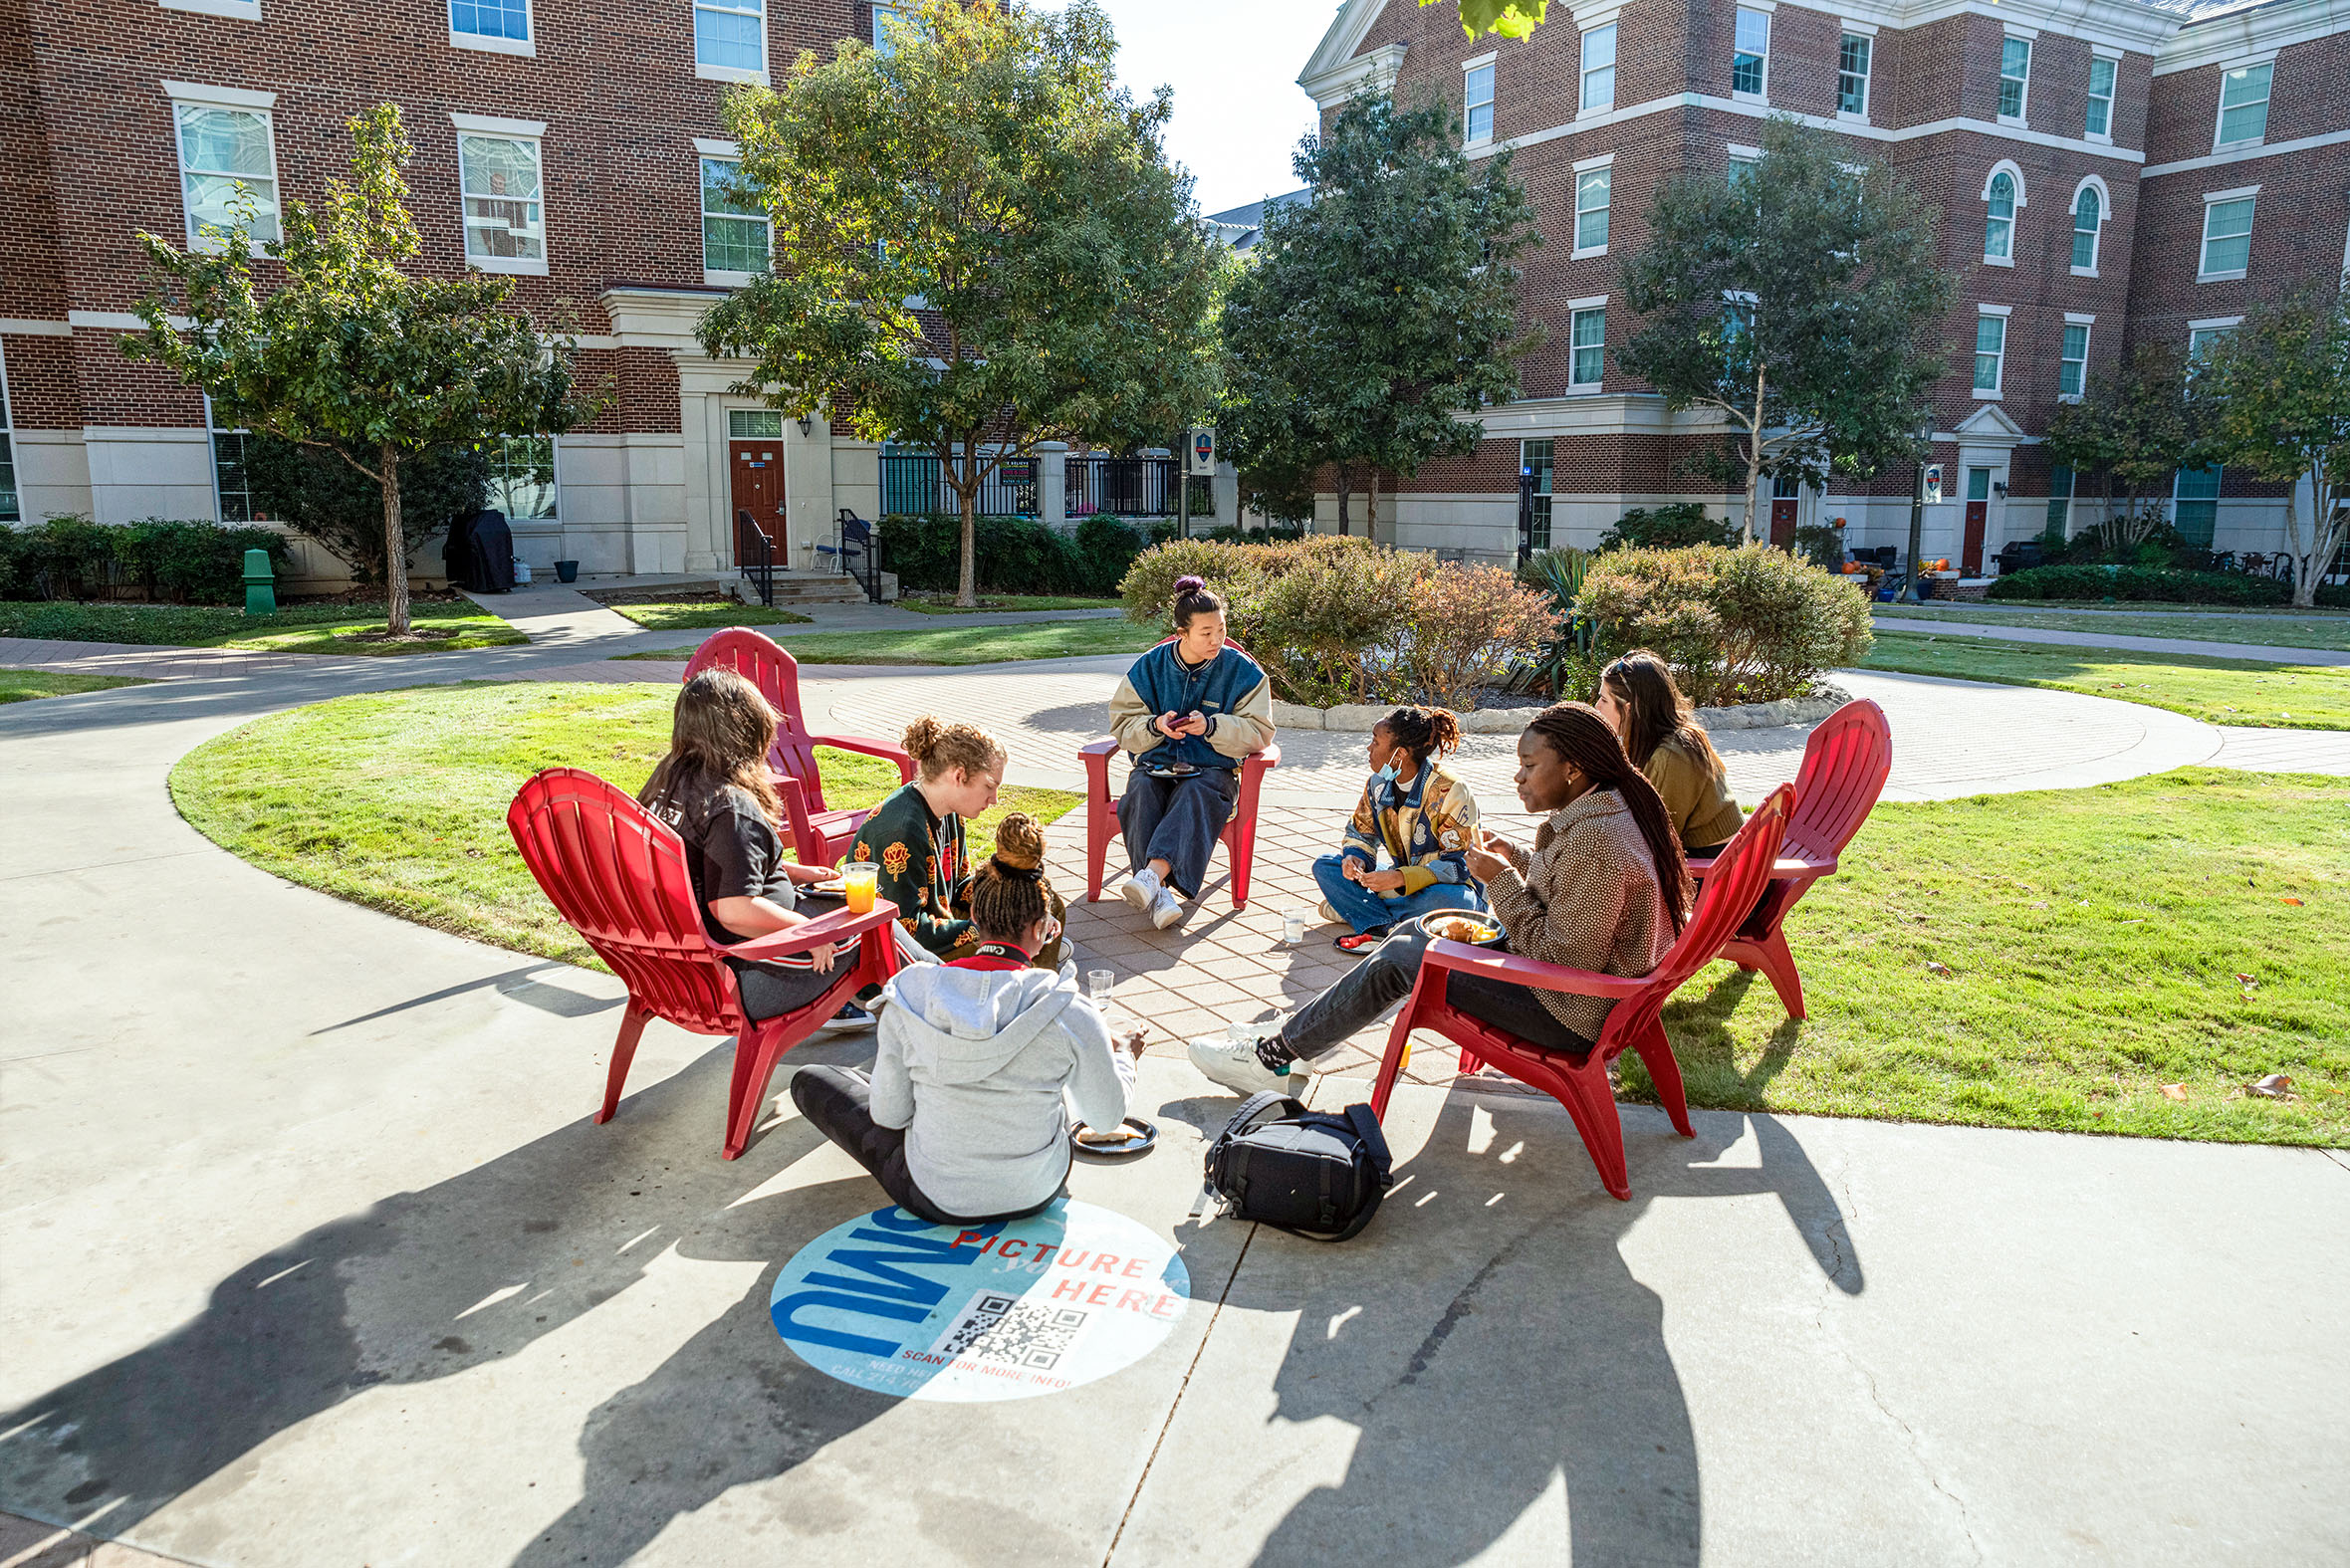 seven students sitting outside in red chairs